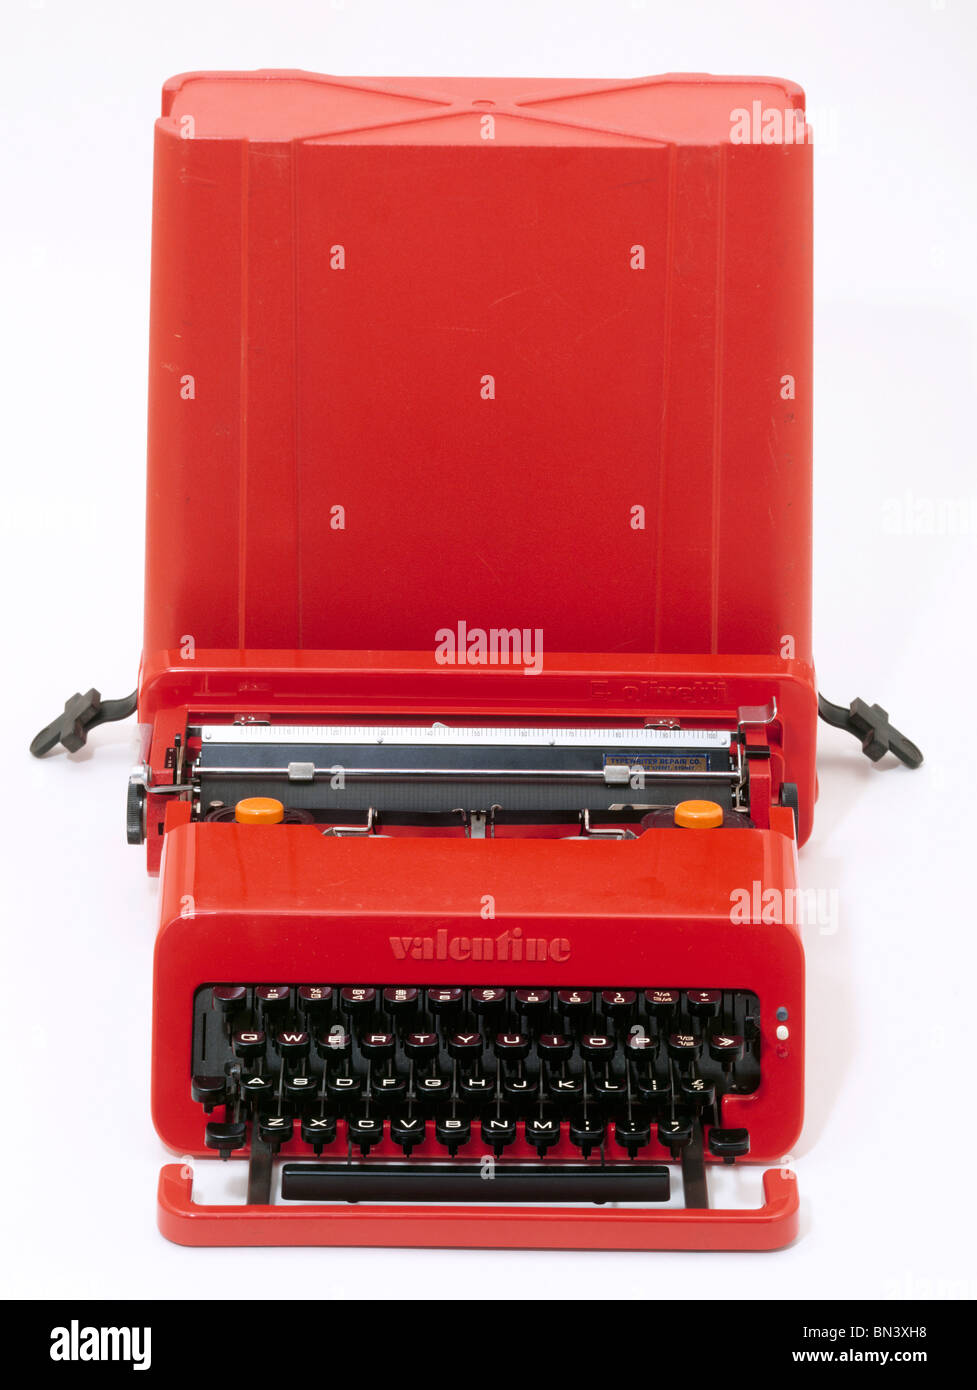 Valentine' typewriter, designed by Ettore Sottsass with Perry King. Italy, c.1969 Stock Photo